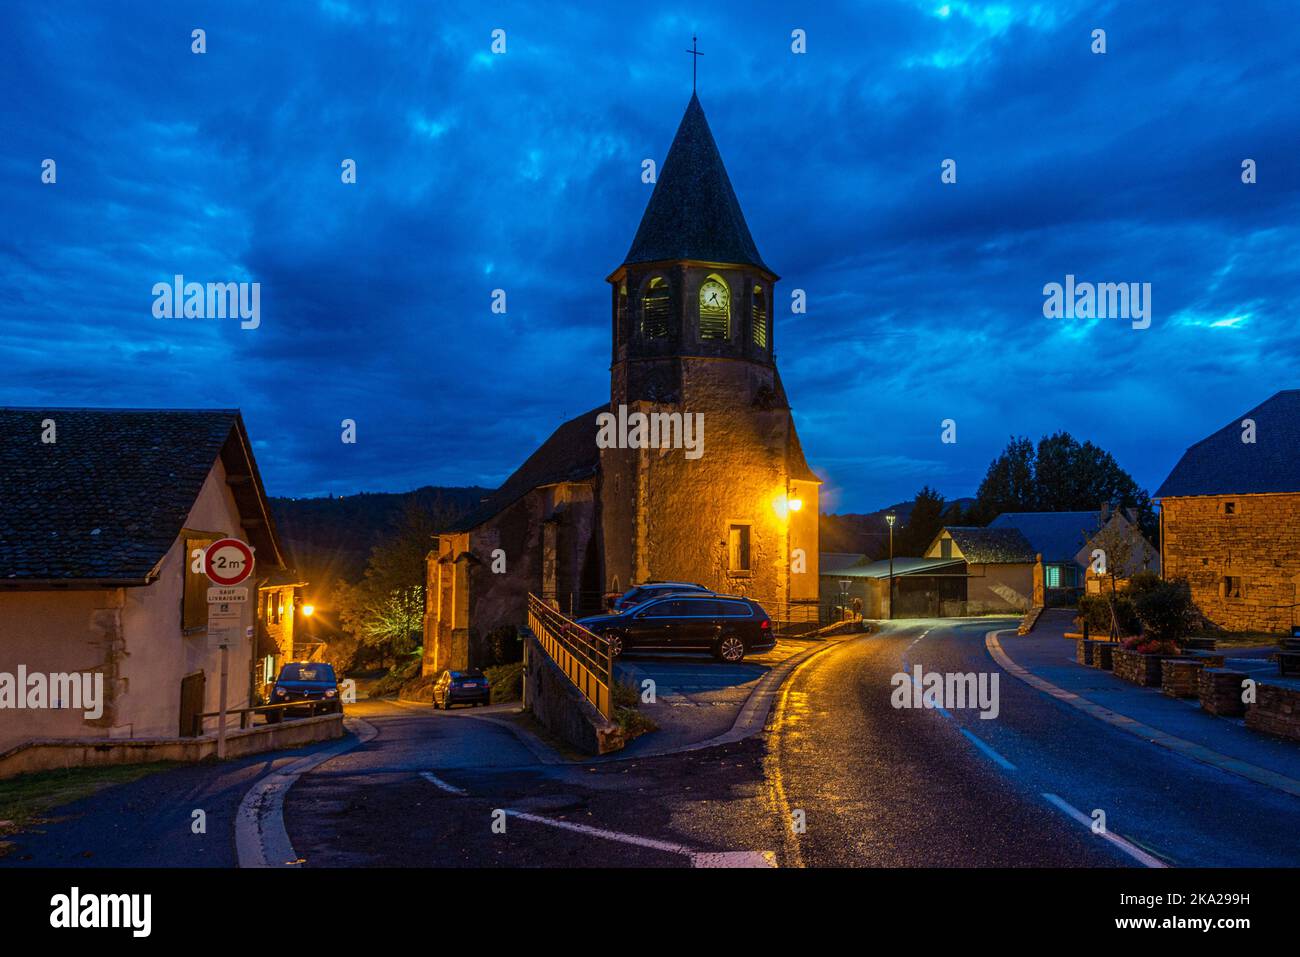 The small village of Mandailles in the Aubrac region, Occitanie, France Stock Photo